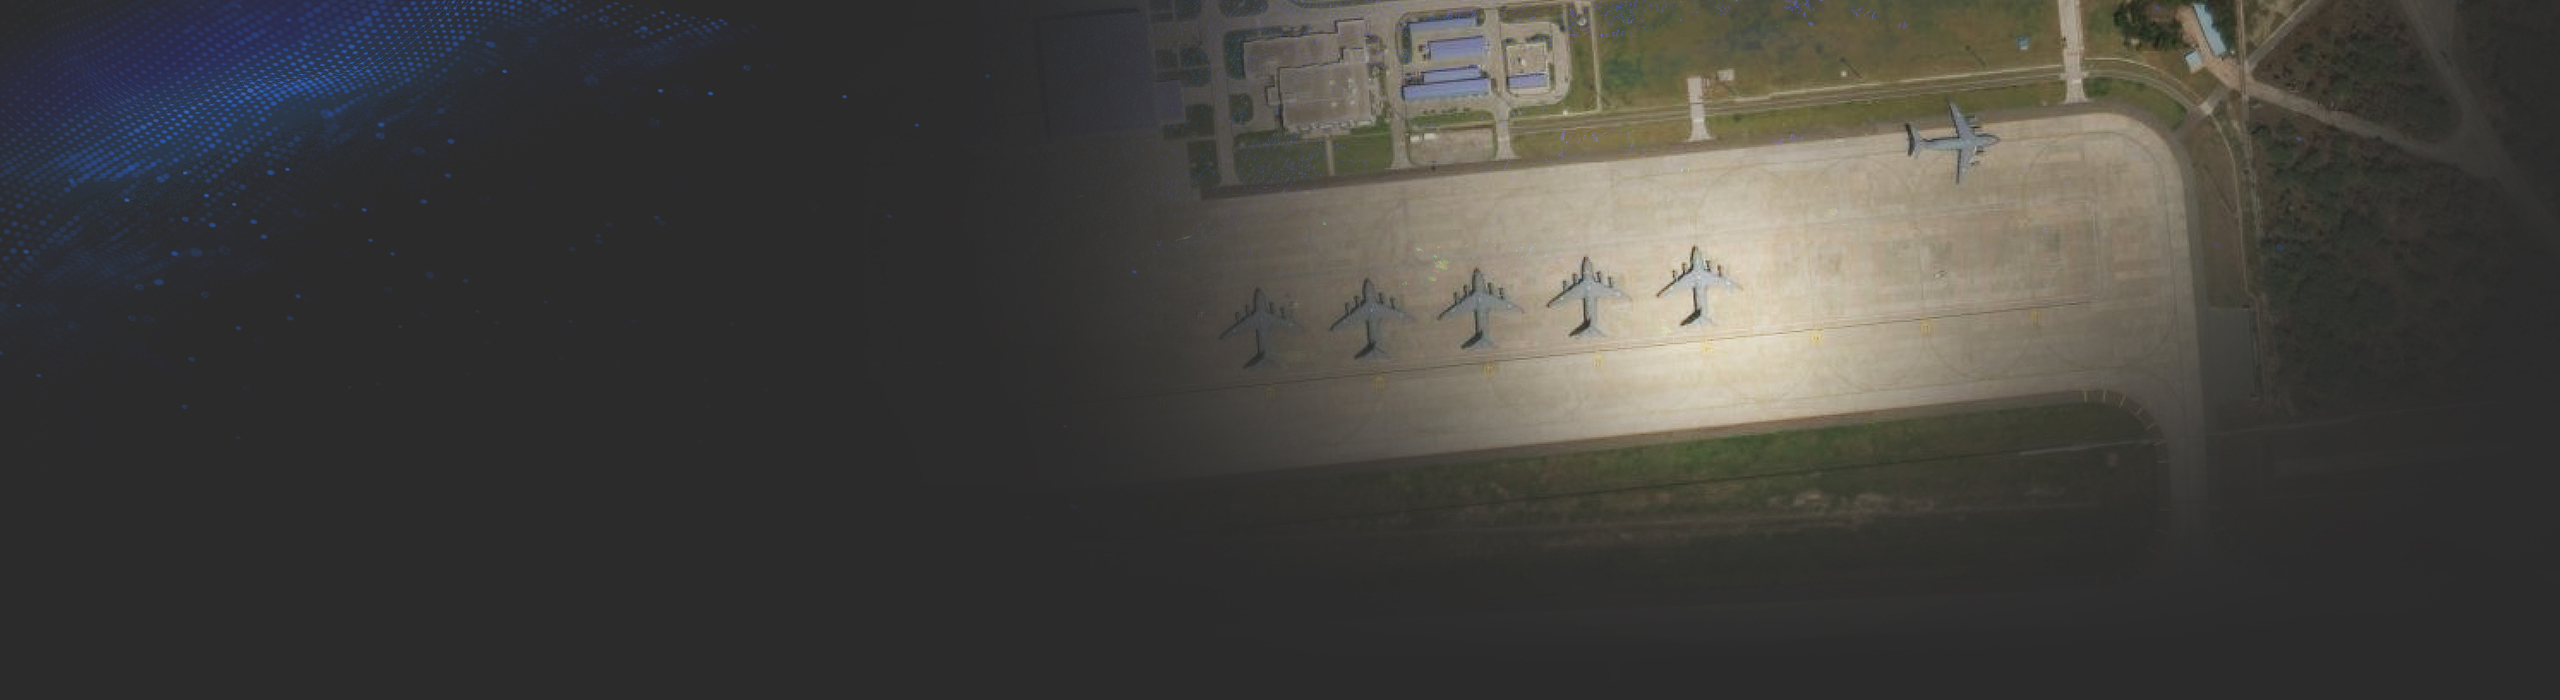 Image of a military airfield with jets parked on the tarmac.